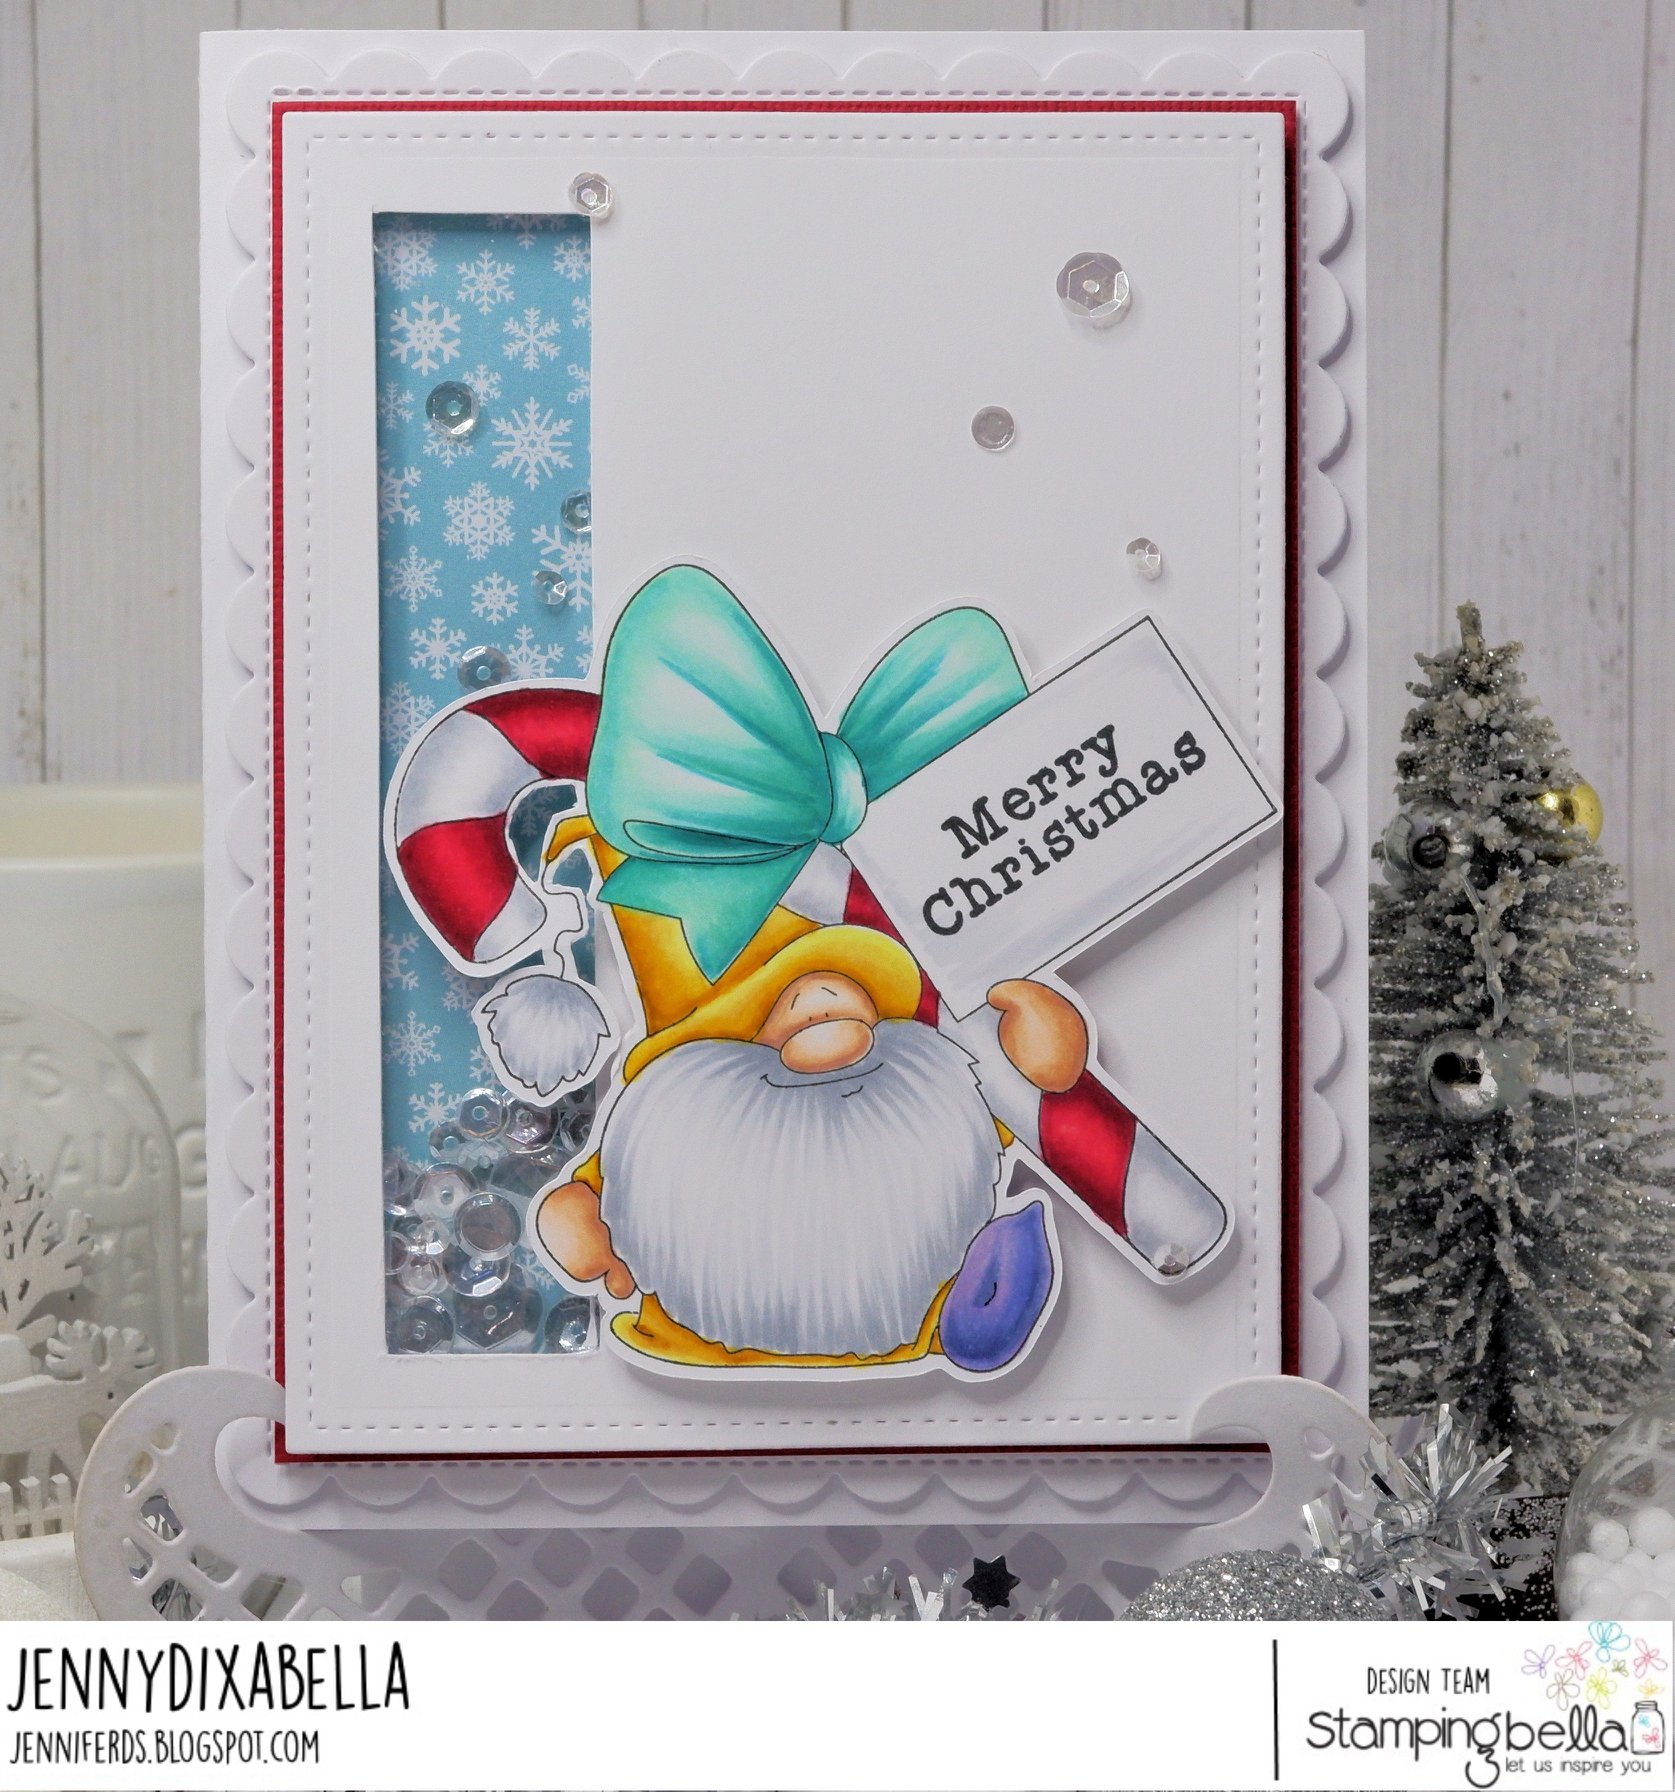 www.stampingbella.com. Rubber stamp used: the Gnome and the Candy Cane. card by Jenny Dix